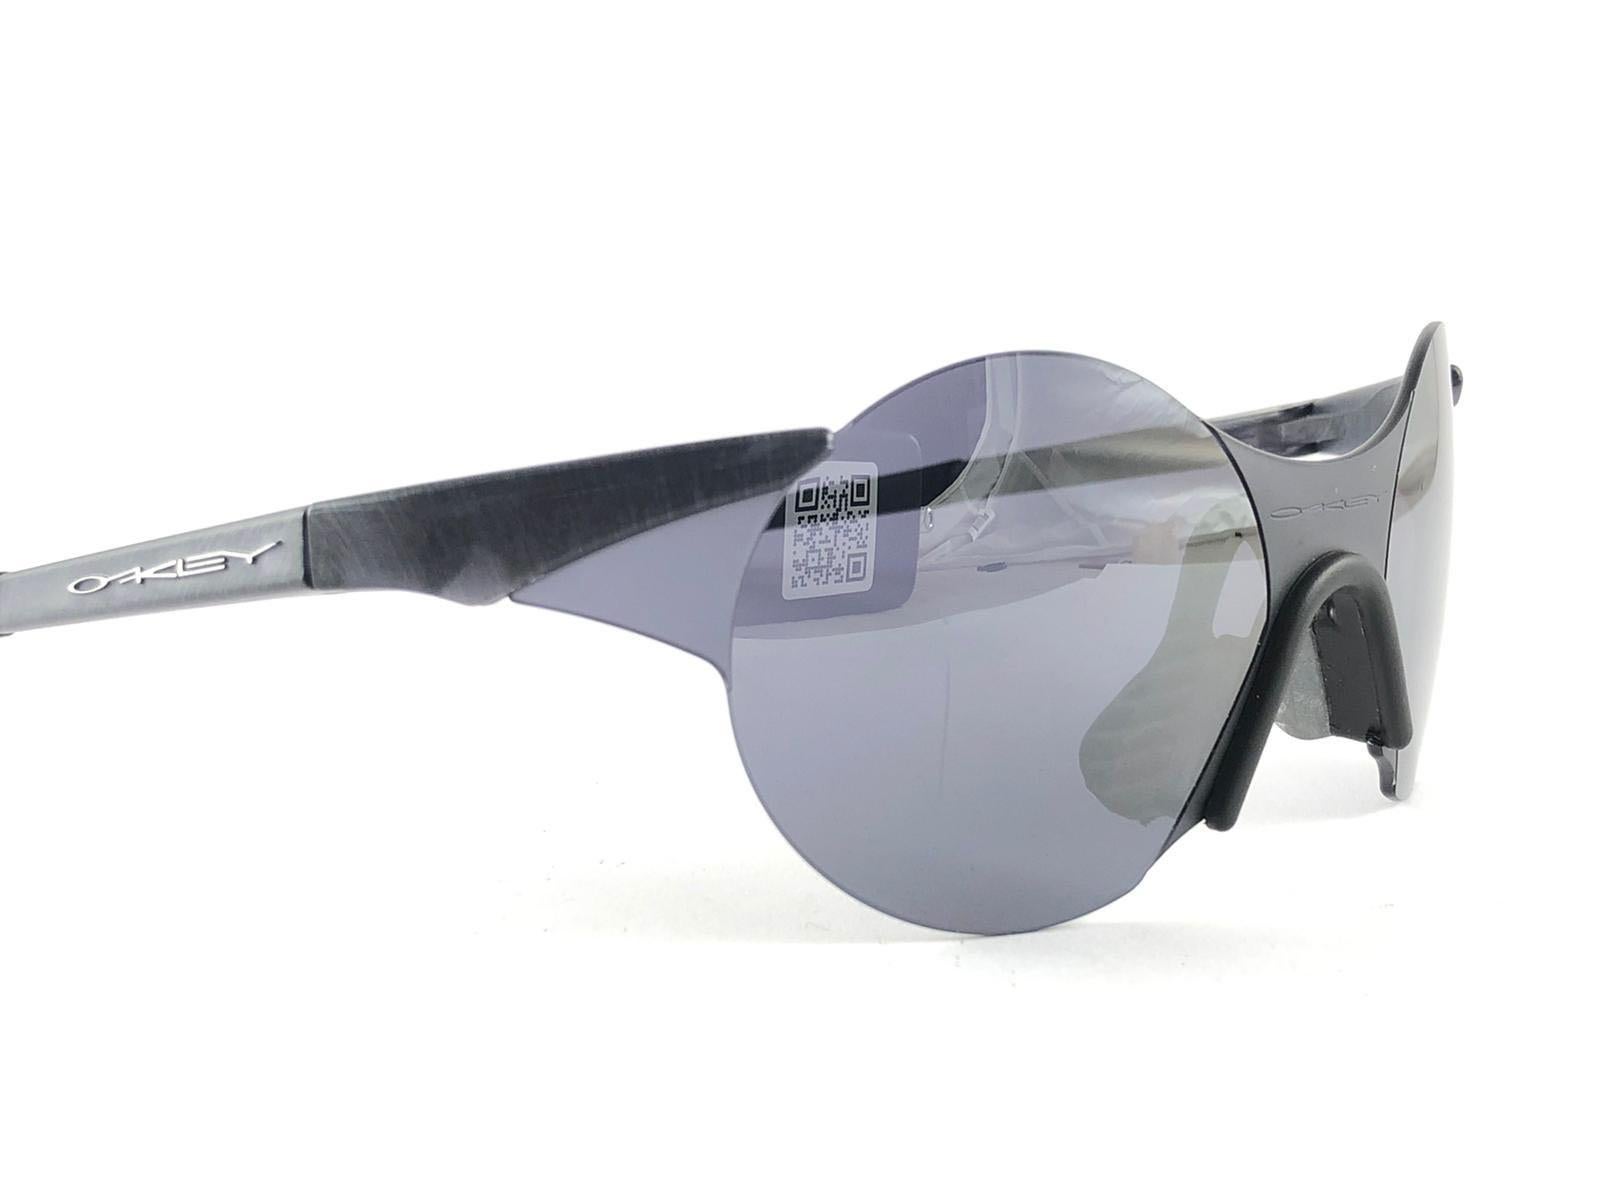 New Vintage are Oakley Sunglasses. Wrap black & grey sports frame with grey mirror lenses.
New never worn or displayed. This item might show minor sign of wear due to storage.

Made in Germany.

FRONT 14
LENS HEIGHT 4.8
LENS WIDTH 4.8
TEMPLES 13